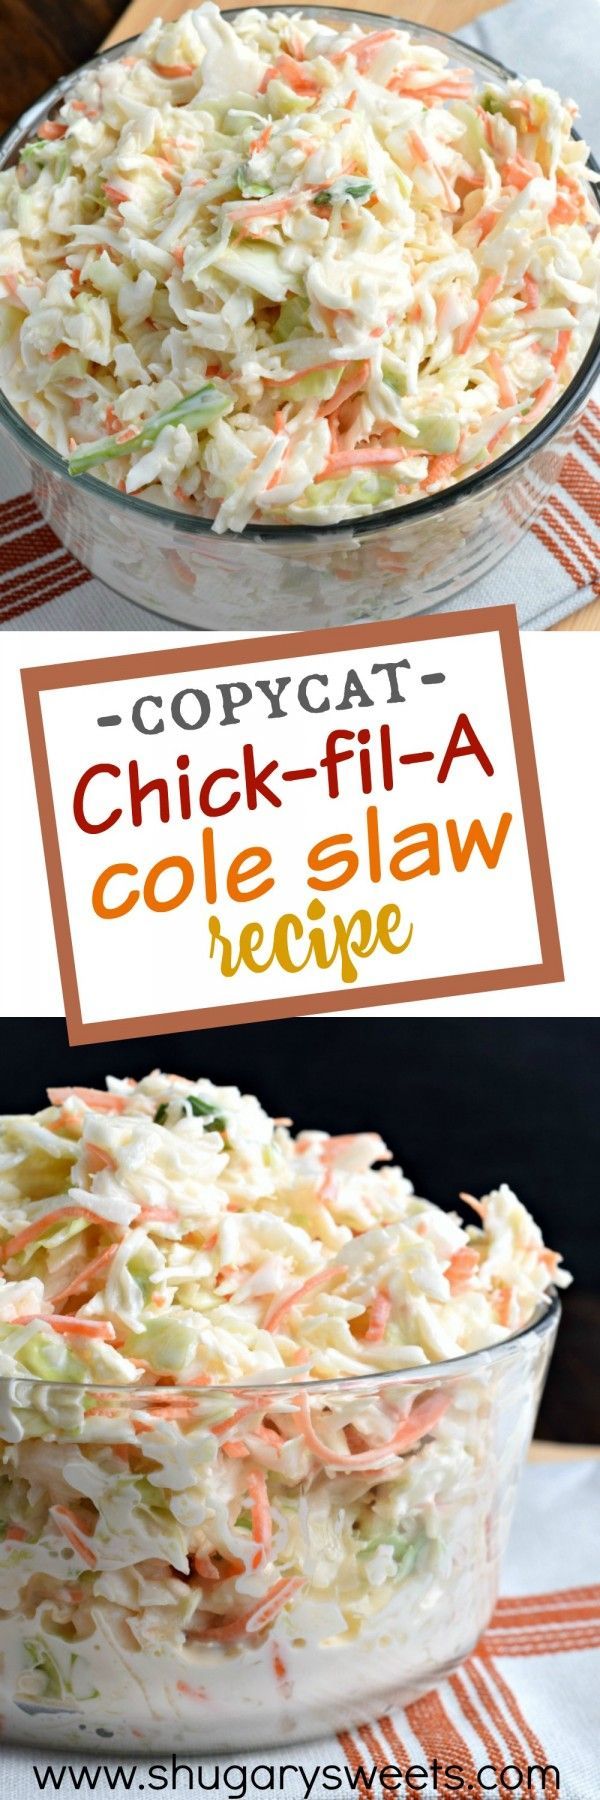 This Copycat Chick-fil-A Cole Slaw recipe is amazing! This is the perfect side dish to any BBQ or potluck!